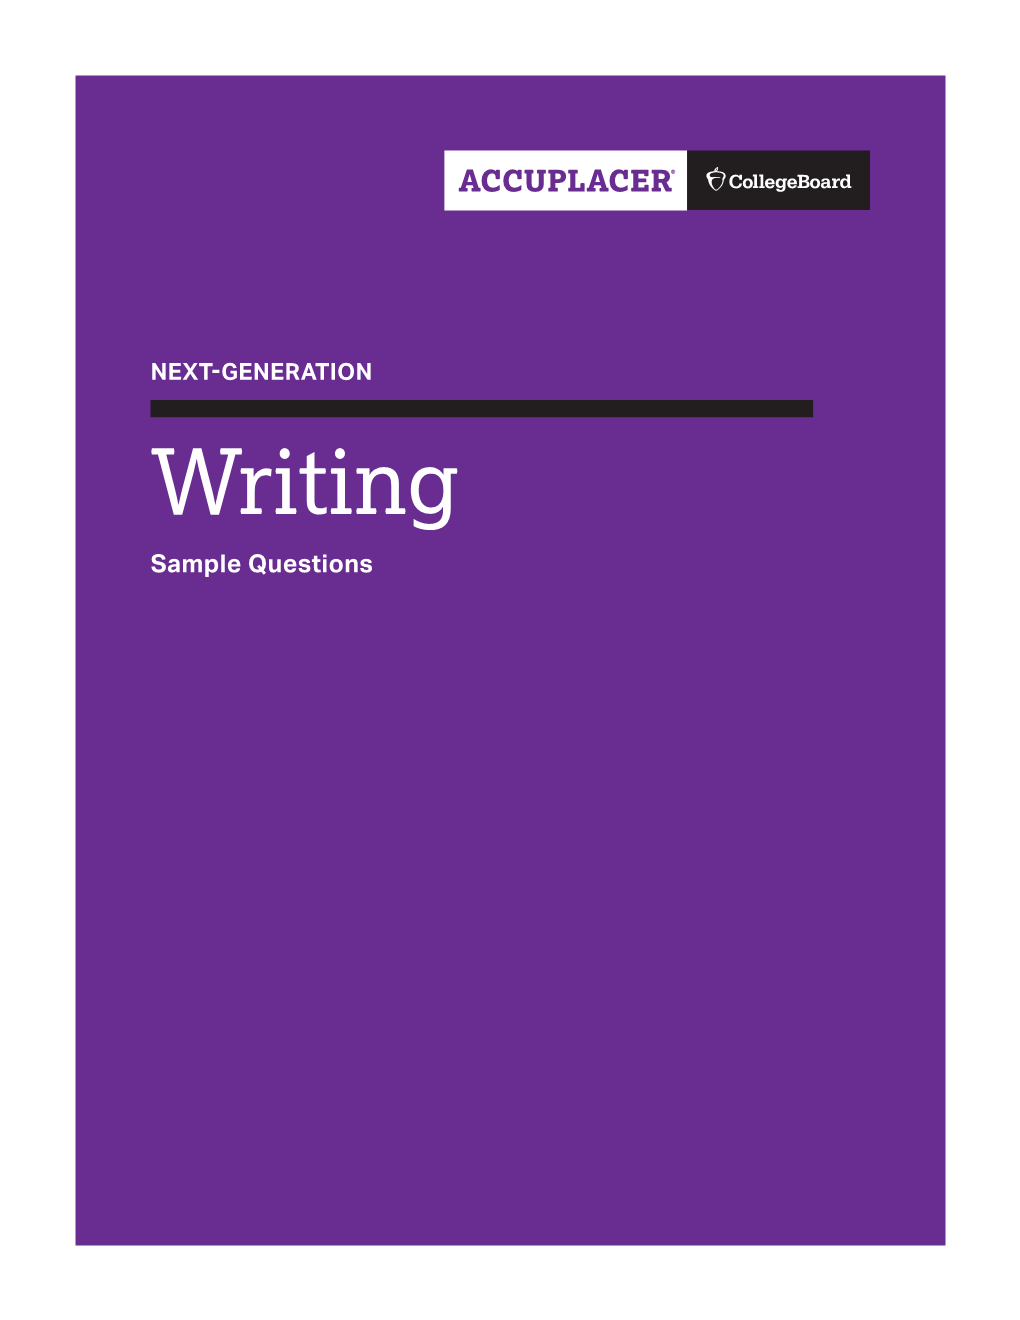 Accuplacer Next-Generation Writing Sample Questions